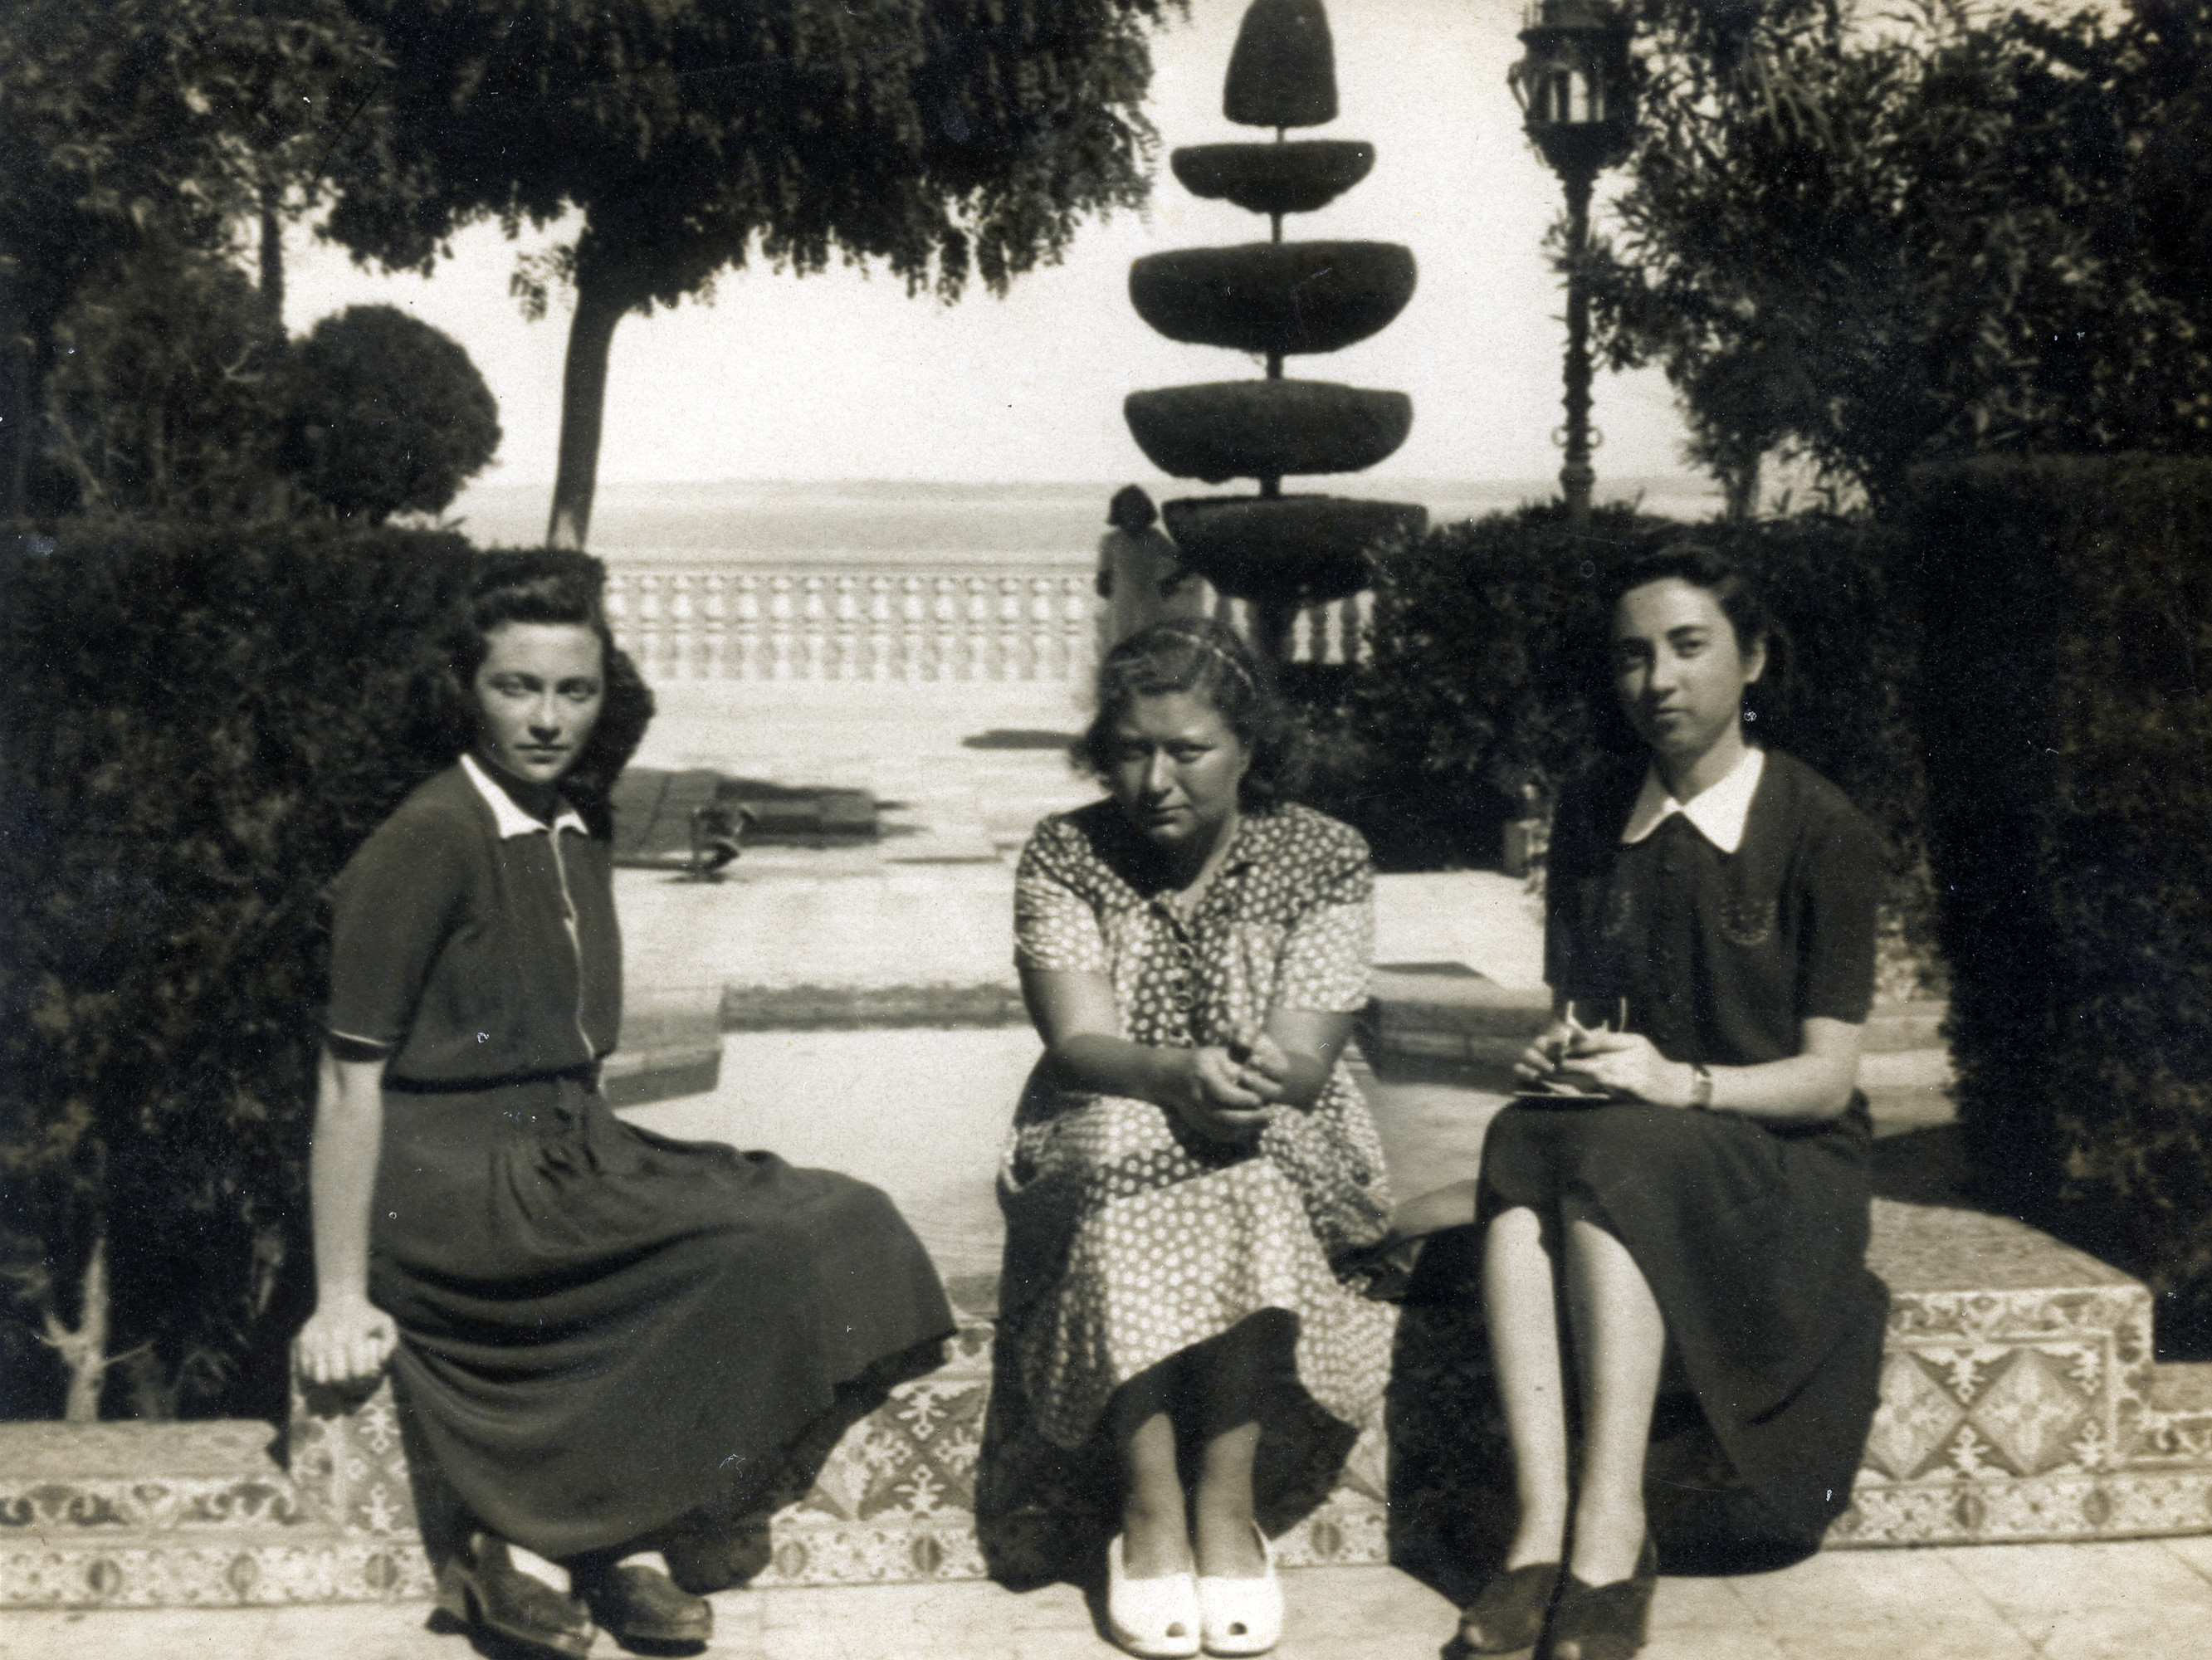 Young women rest in a park en route to Palestine.

Among those pictured is Jenny Ezratty on the left,